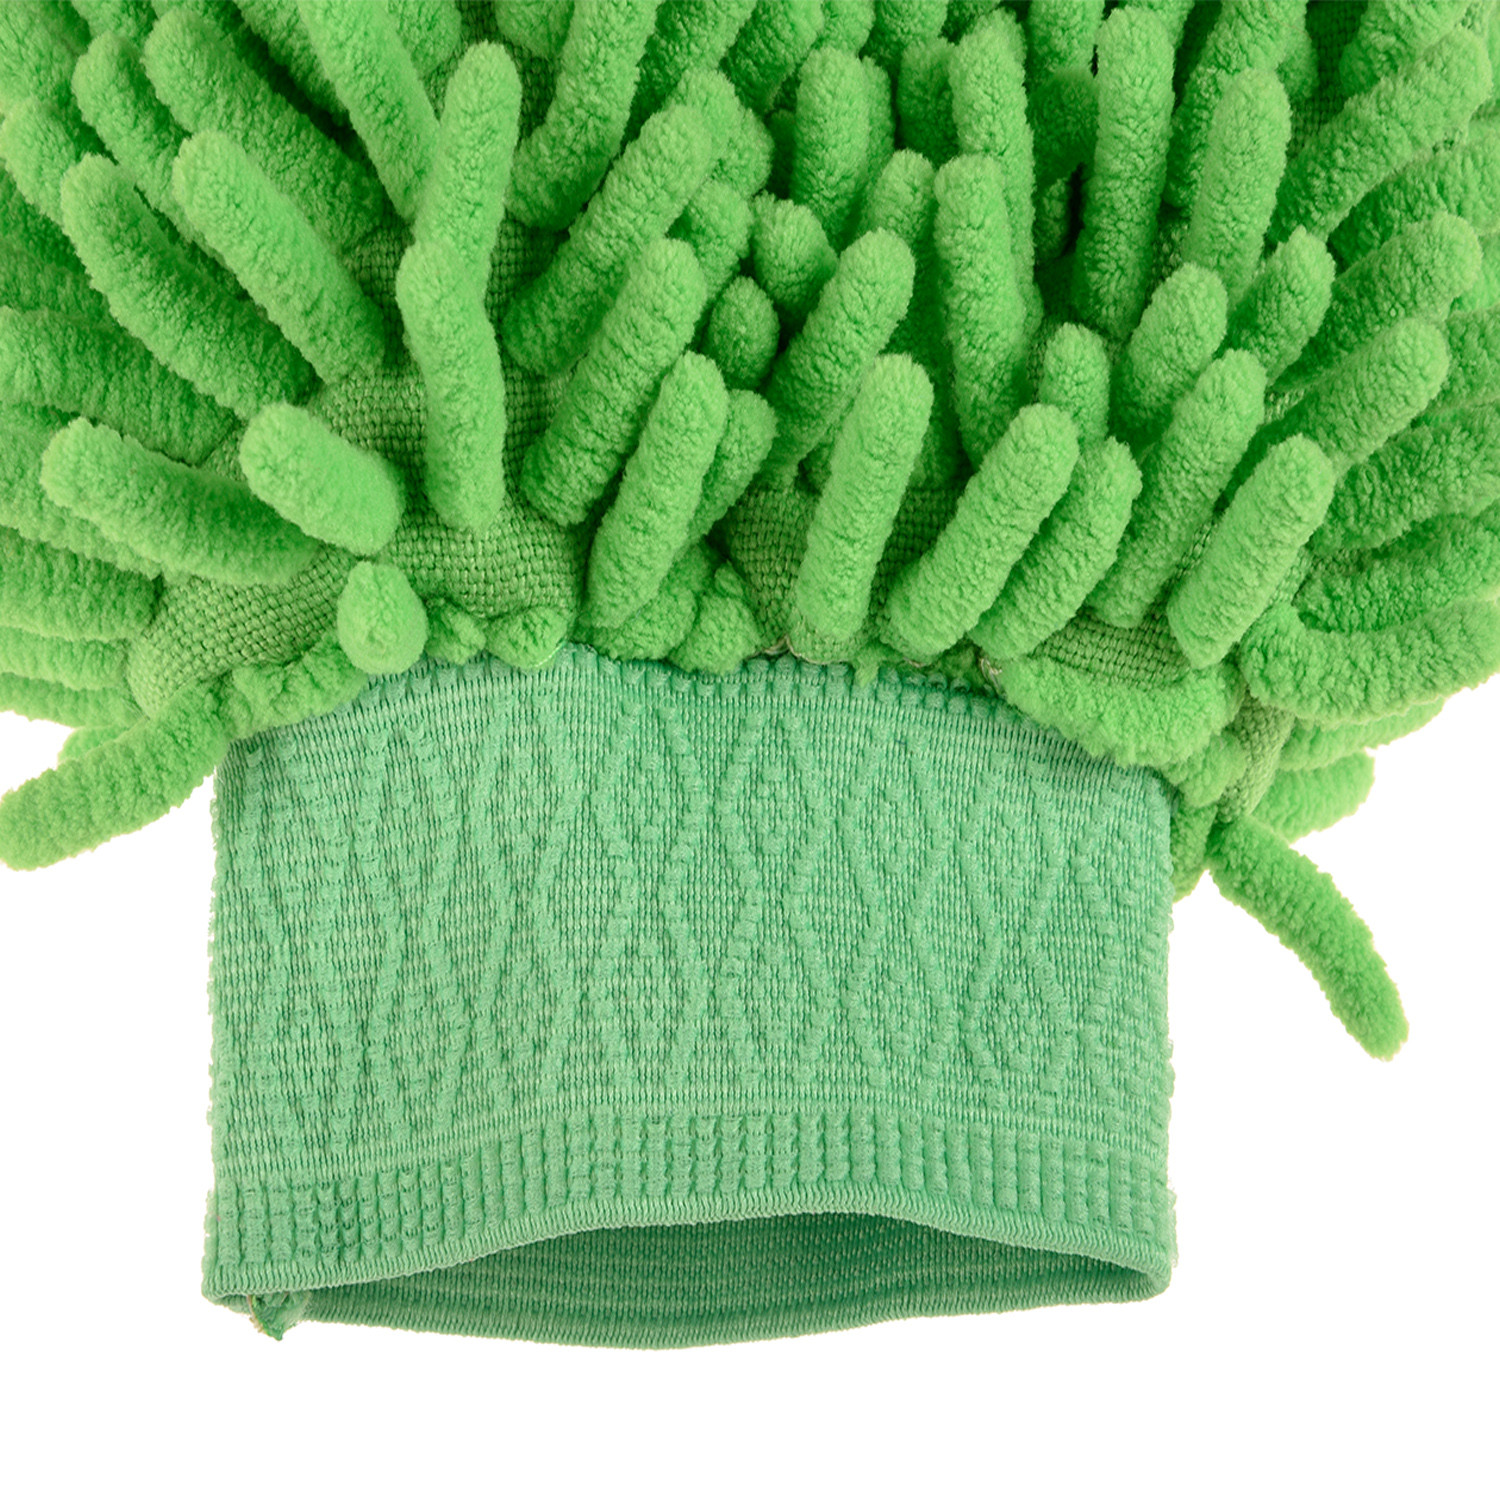 Kuber Industries Chenille Mitts|Microfiber Cleaning Gloves|Inside Waterproof Cloth Gloves|100 Gram Weighted Hand Duster|Hand Chenille Gloves For Car|Glass (Green)